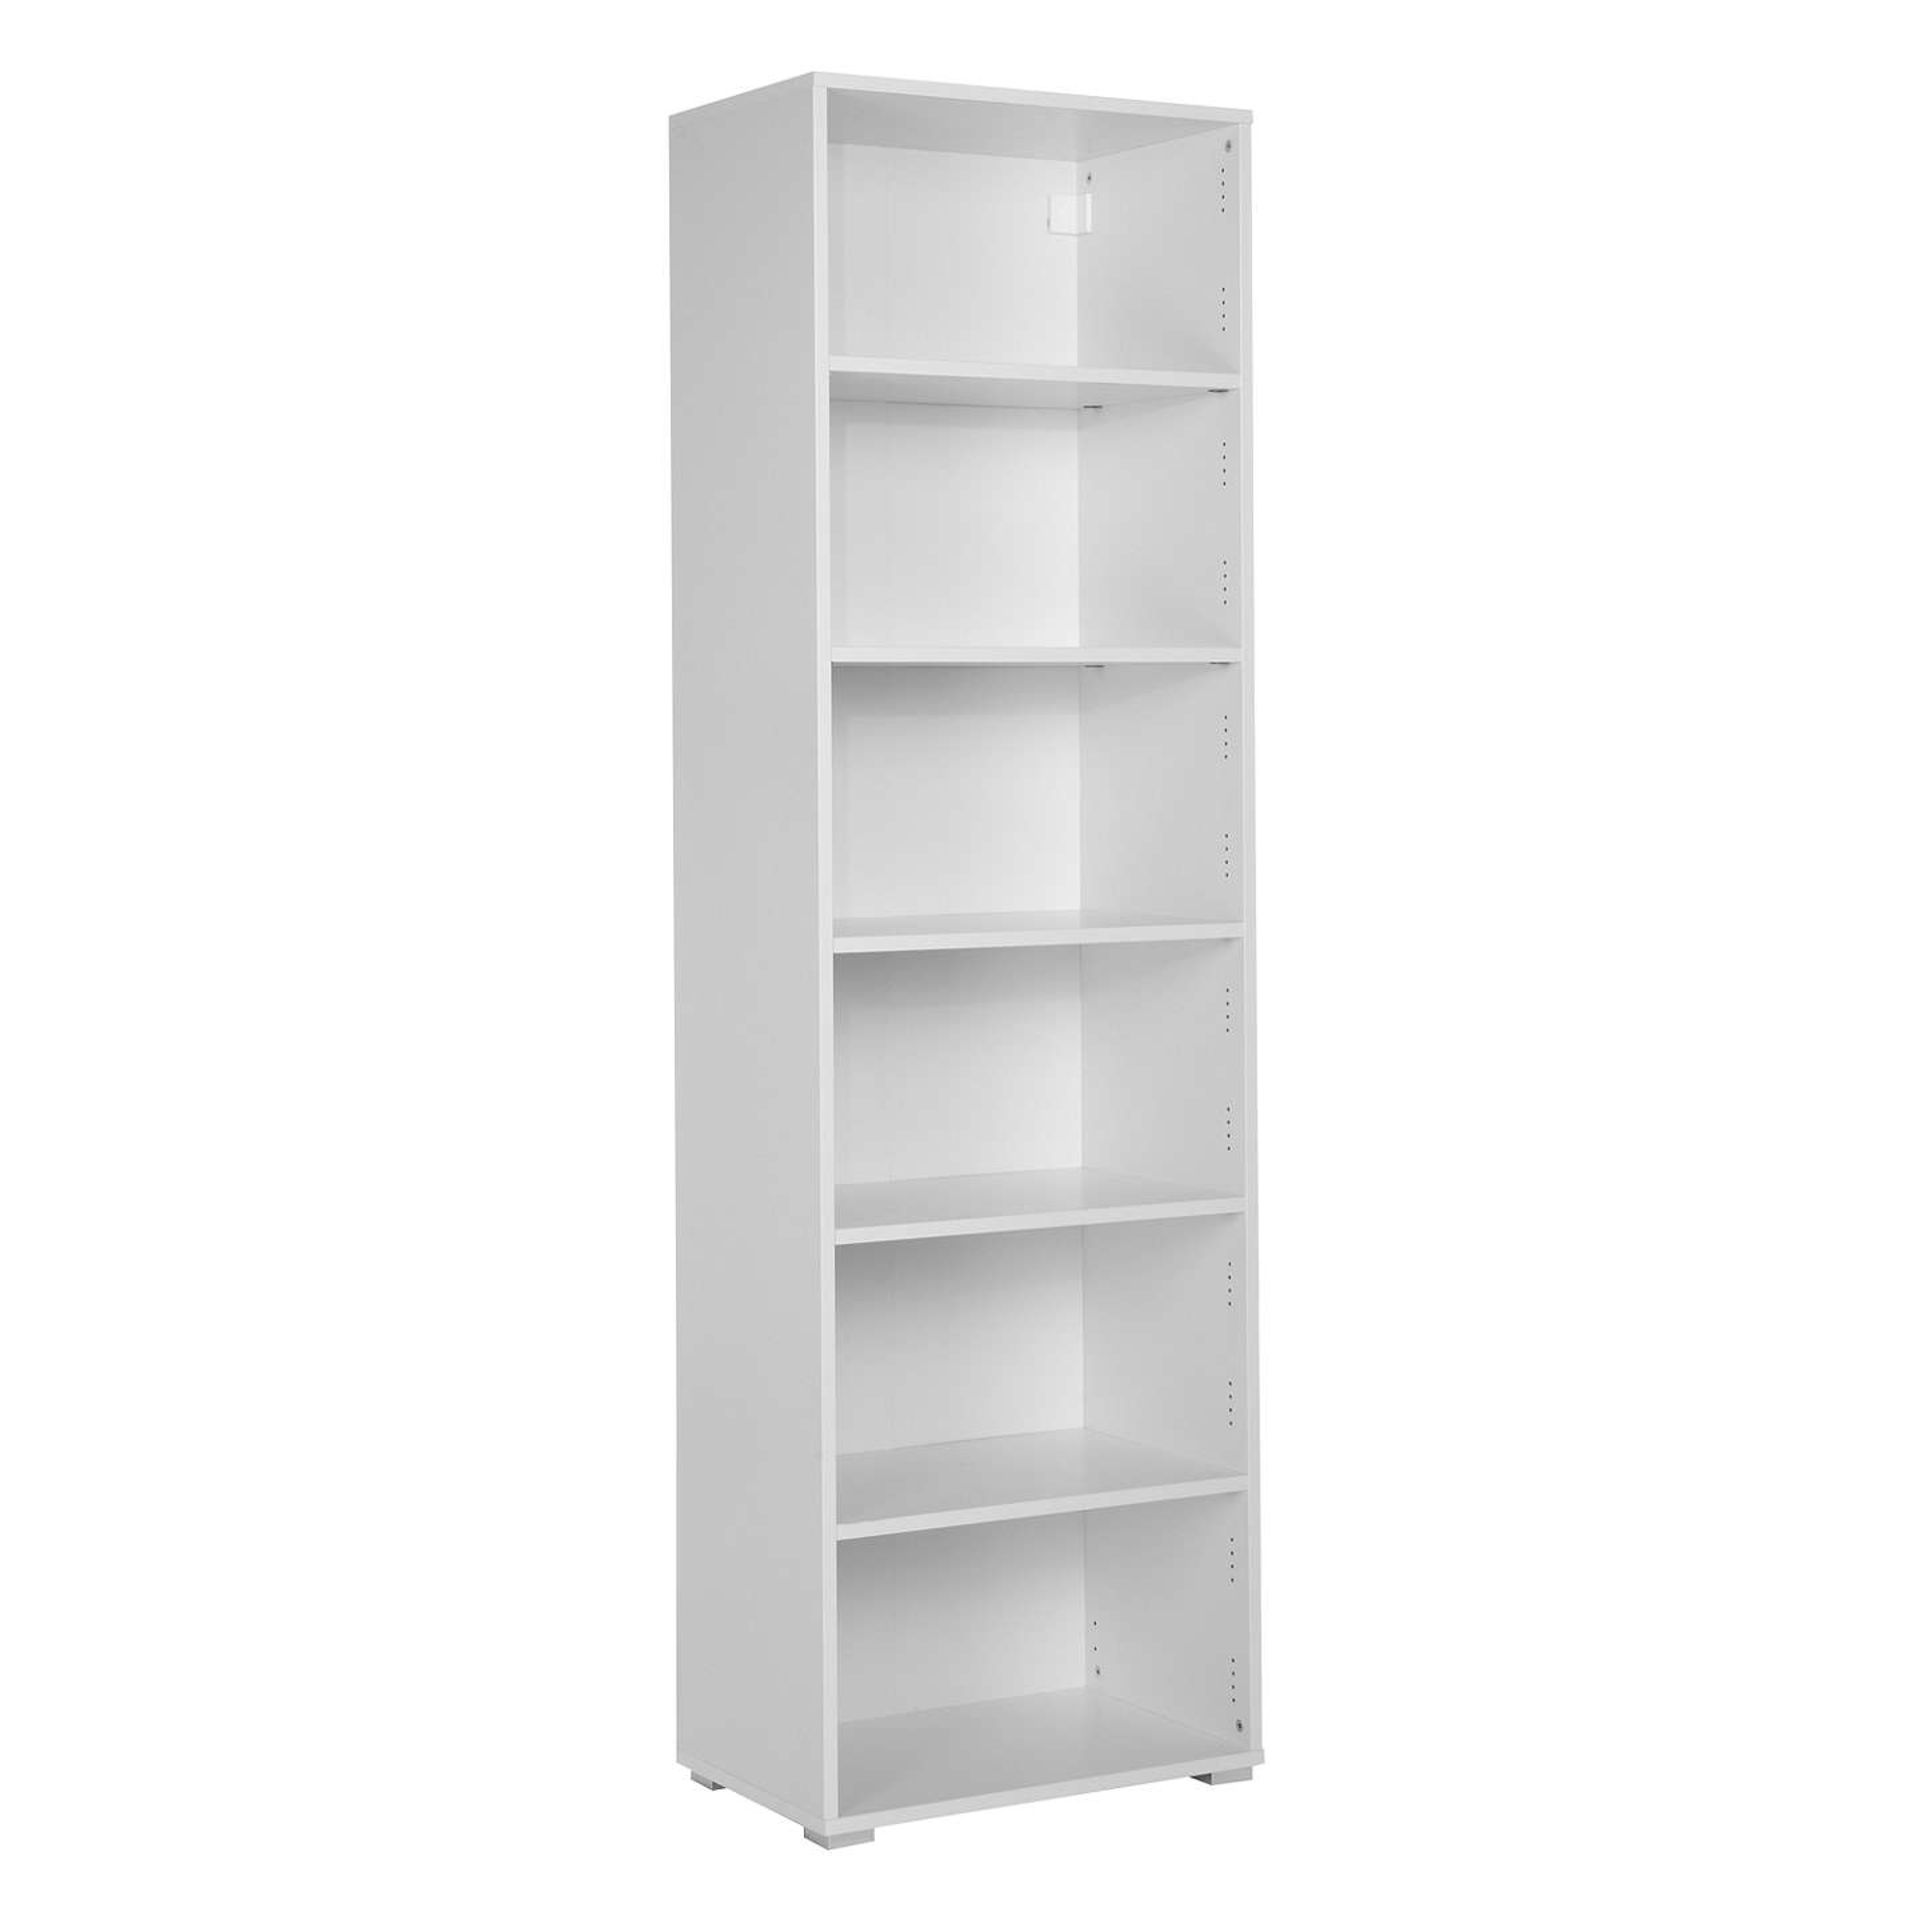 1 x MIXIT TALL STORAGE UNIT (10.07.18) (22) *PLEASE NOTE THAT THE BID PRICE IS MULTIPLIED BY THE